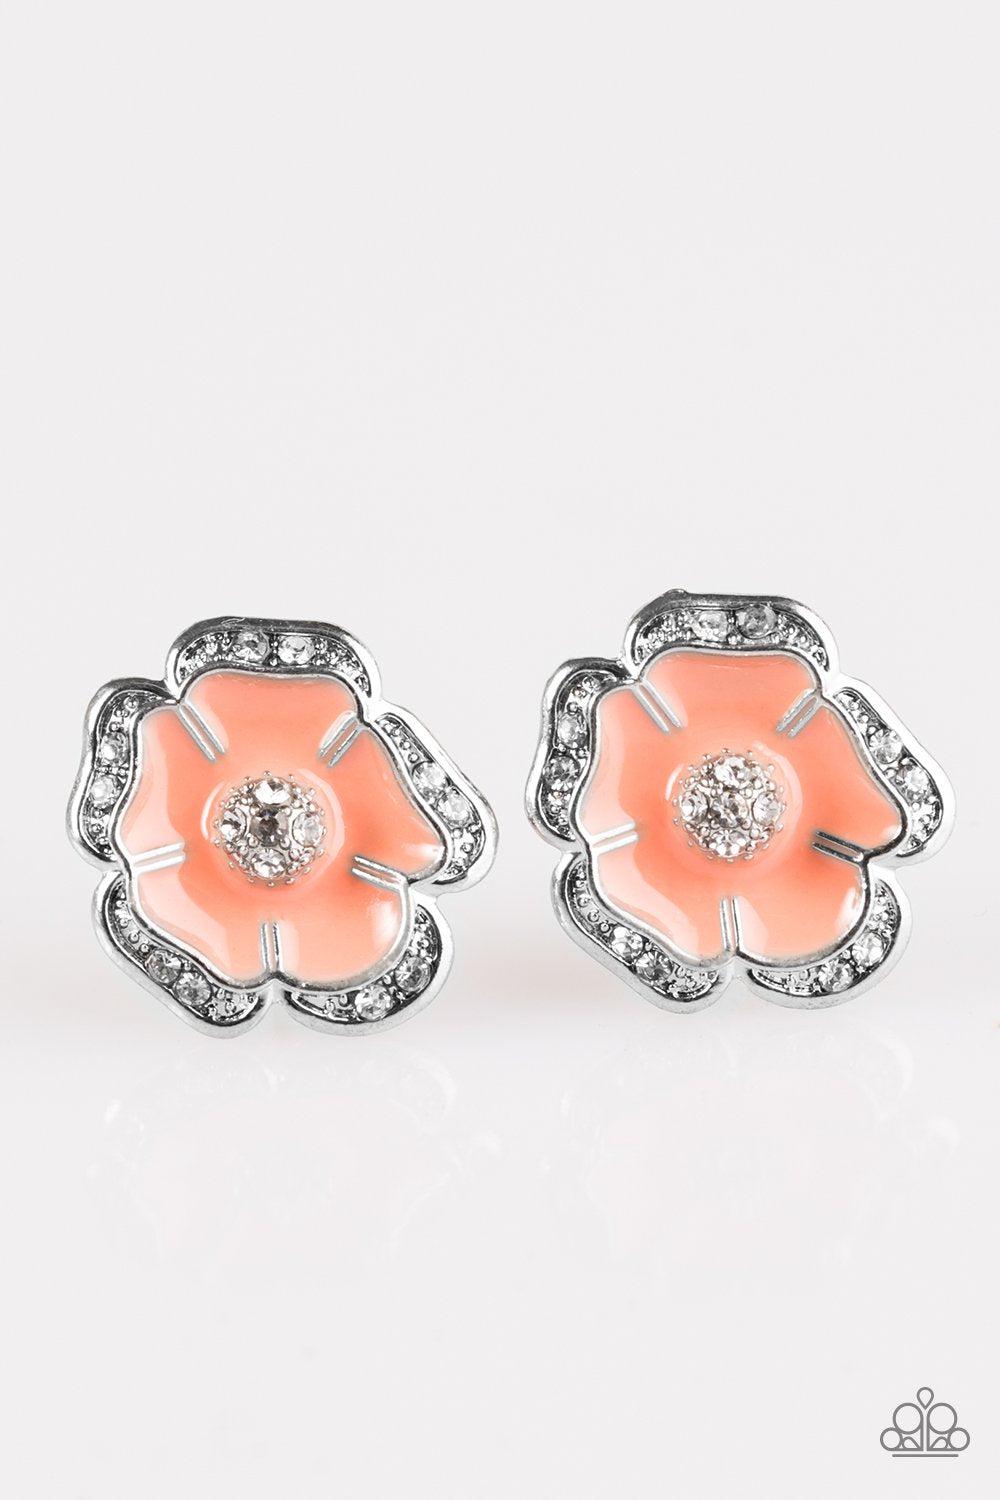 Hibiscus Springs Orange Post Earrings - Paparazzi Accessories-CarasShop.com - $5 Jewelry by Cara Jewels